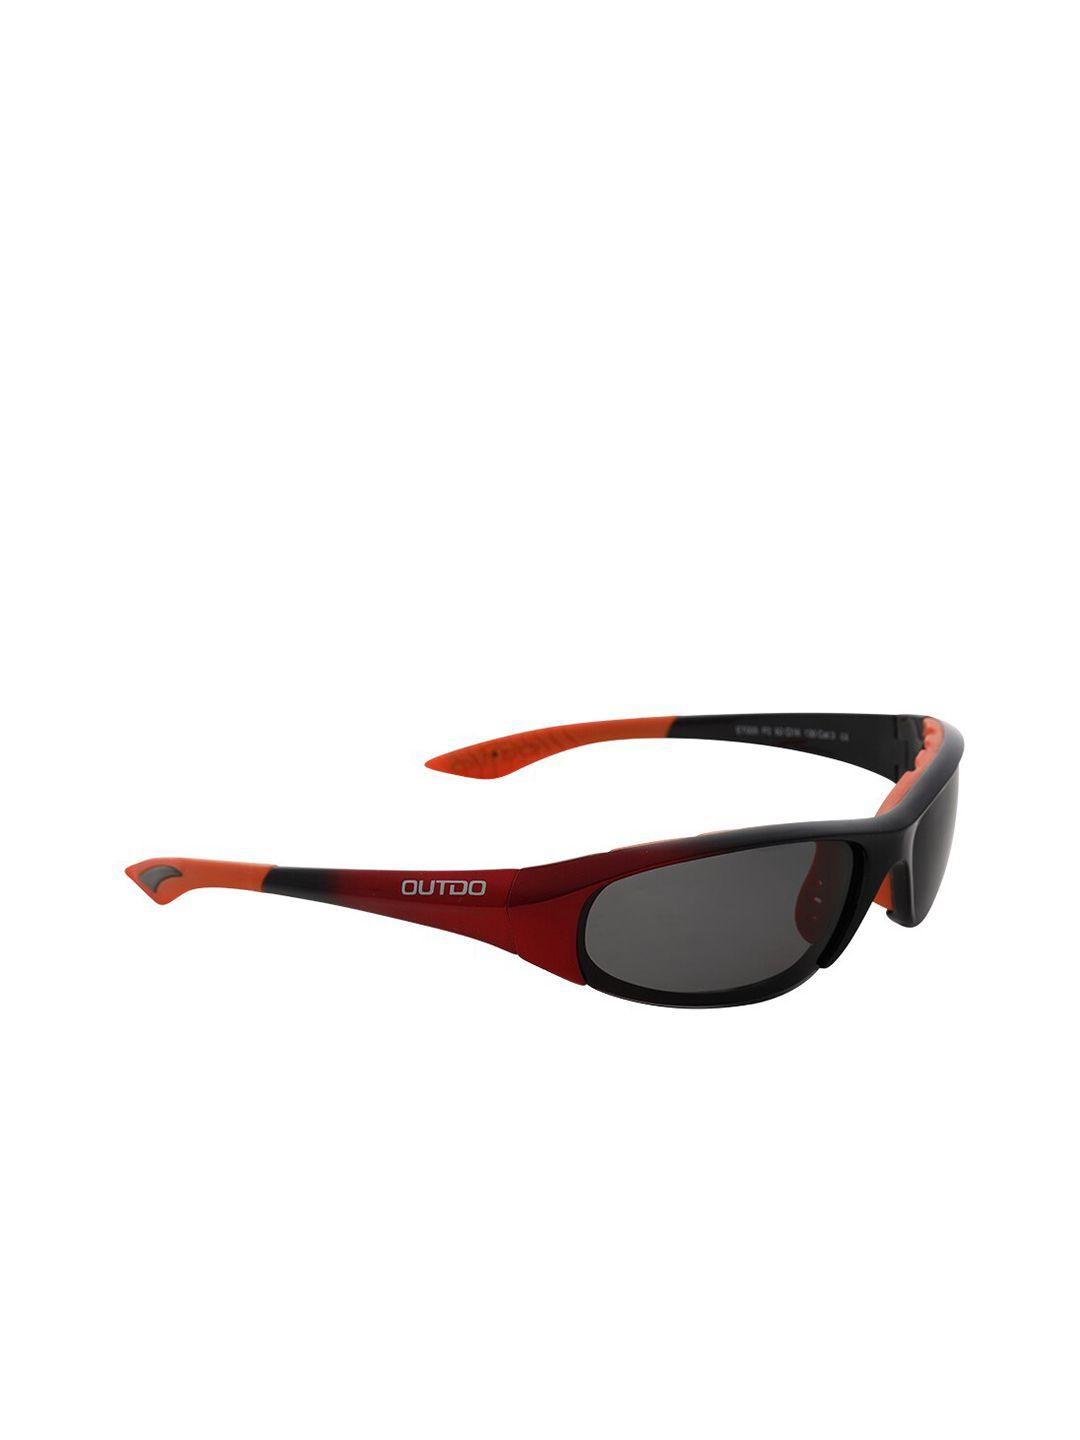 charles london men grey lens & red sports sunglasses with uv protected lens